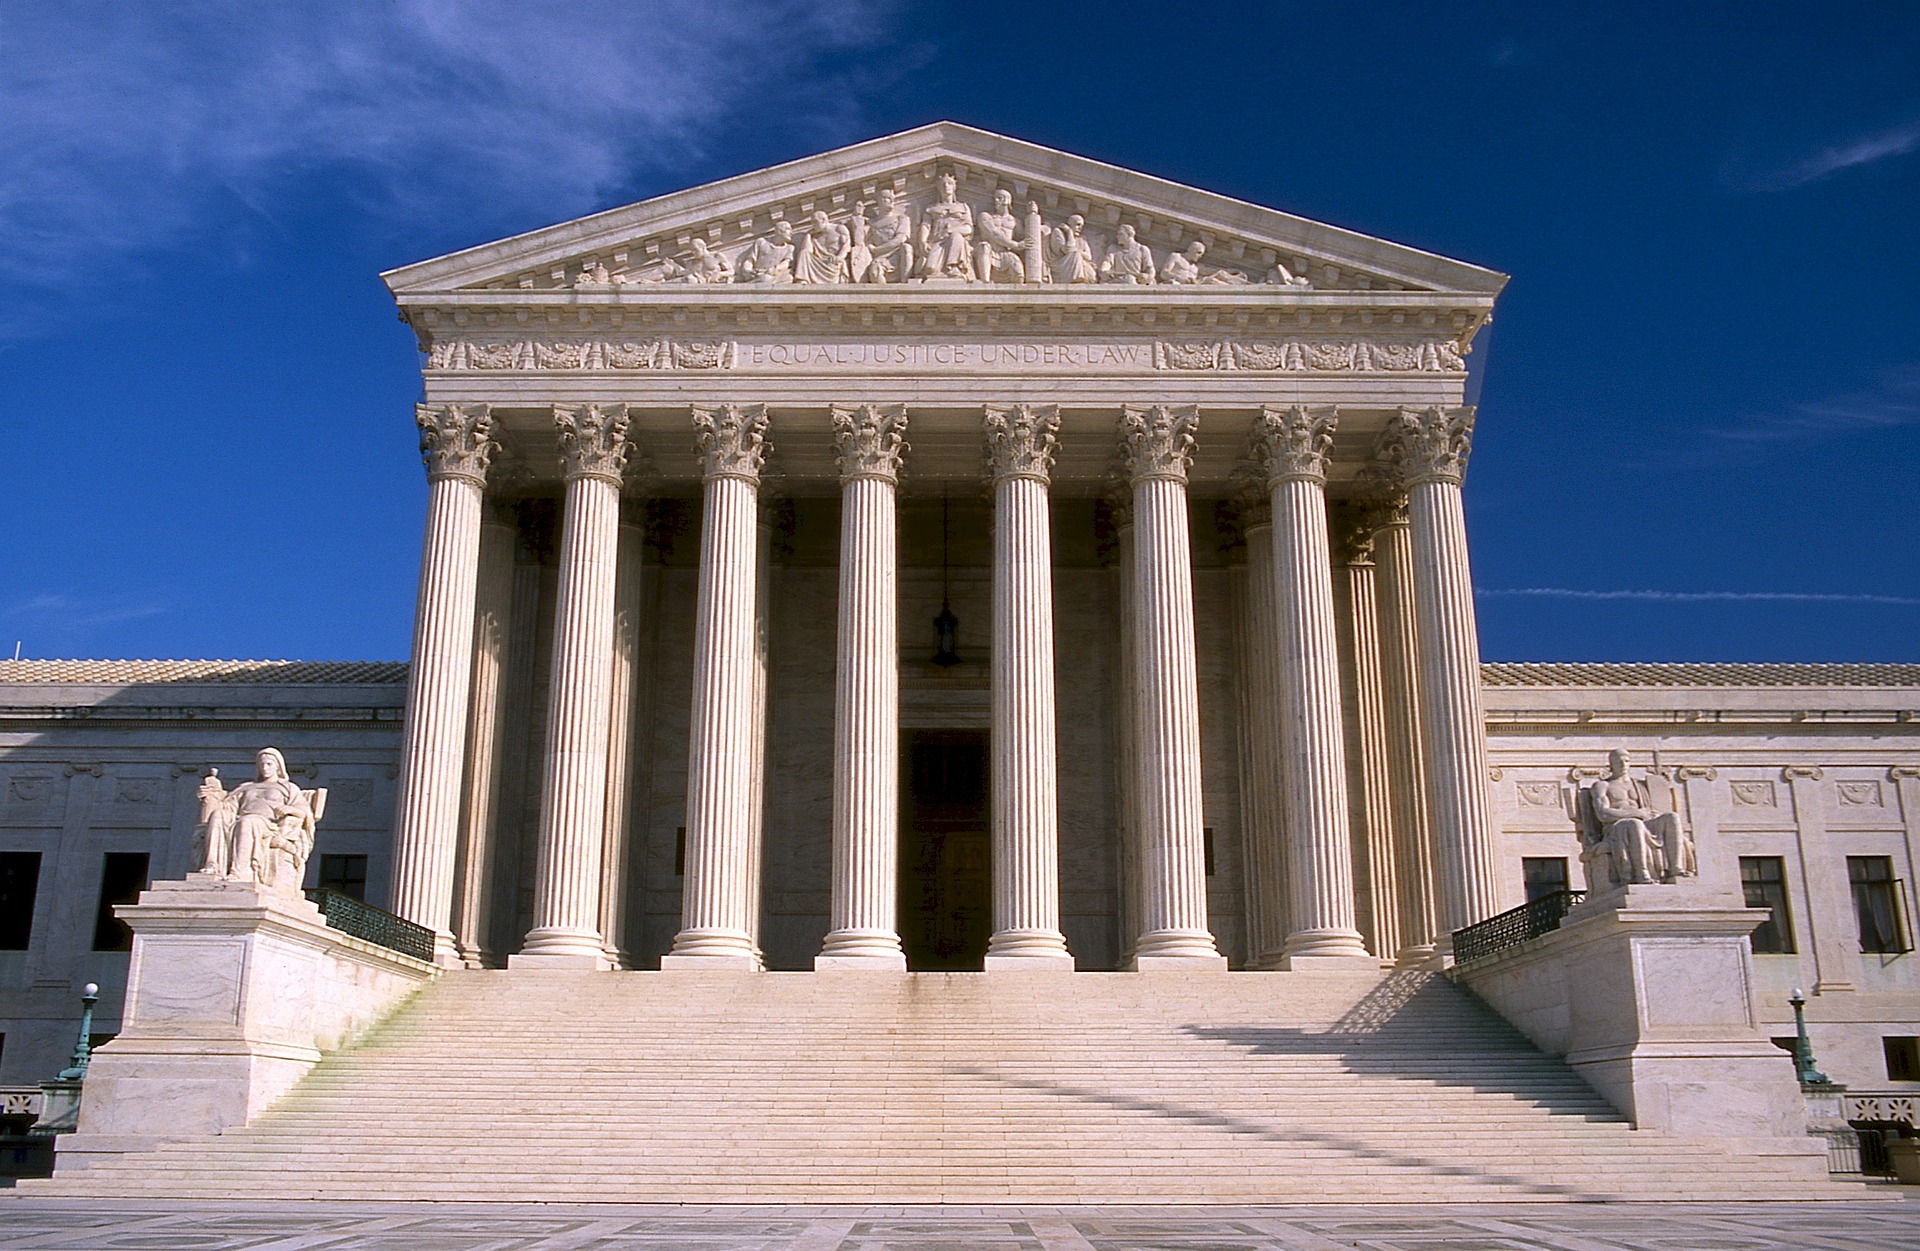 Photo of the U.S. Supreme Court building